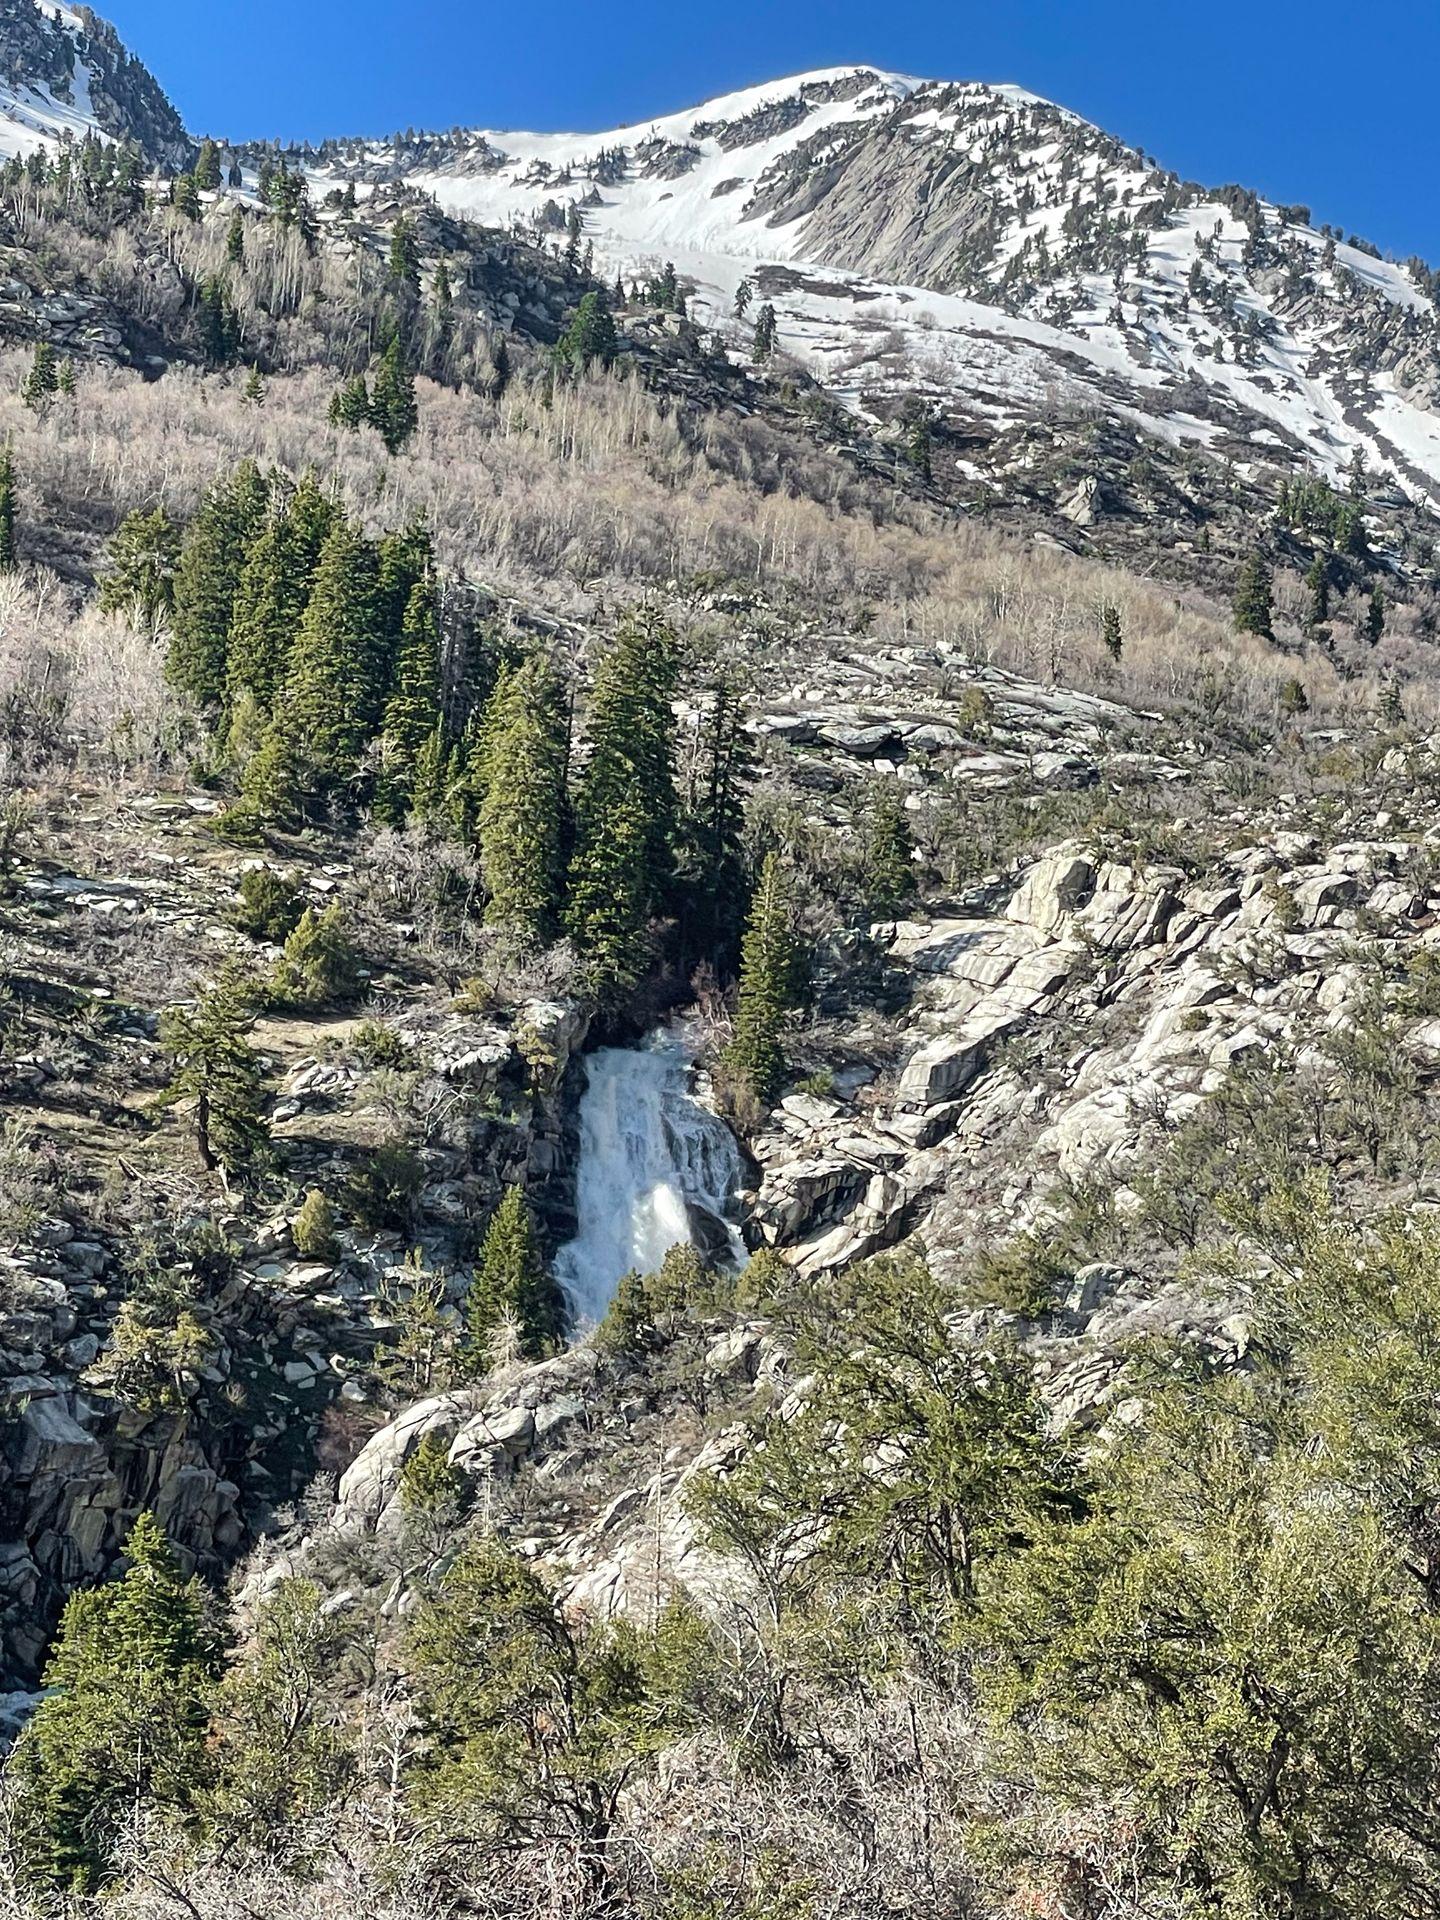 A view of the waterfall in the distnace with a snow-capped mountain above it